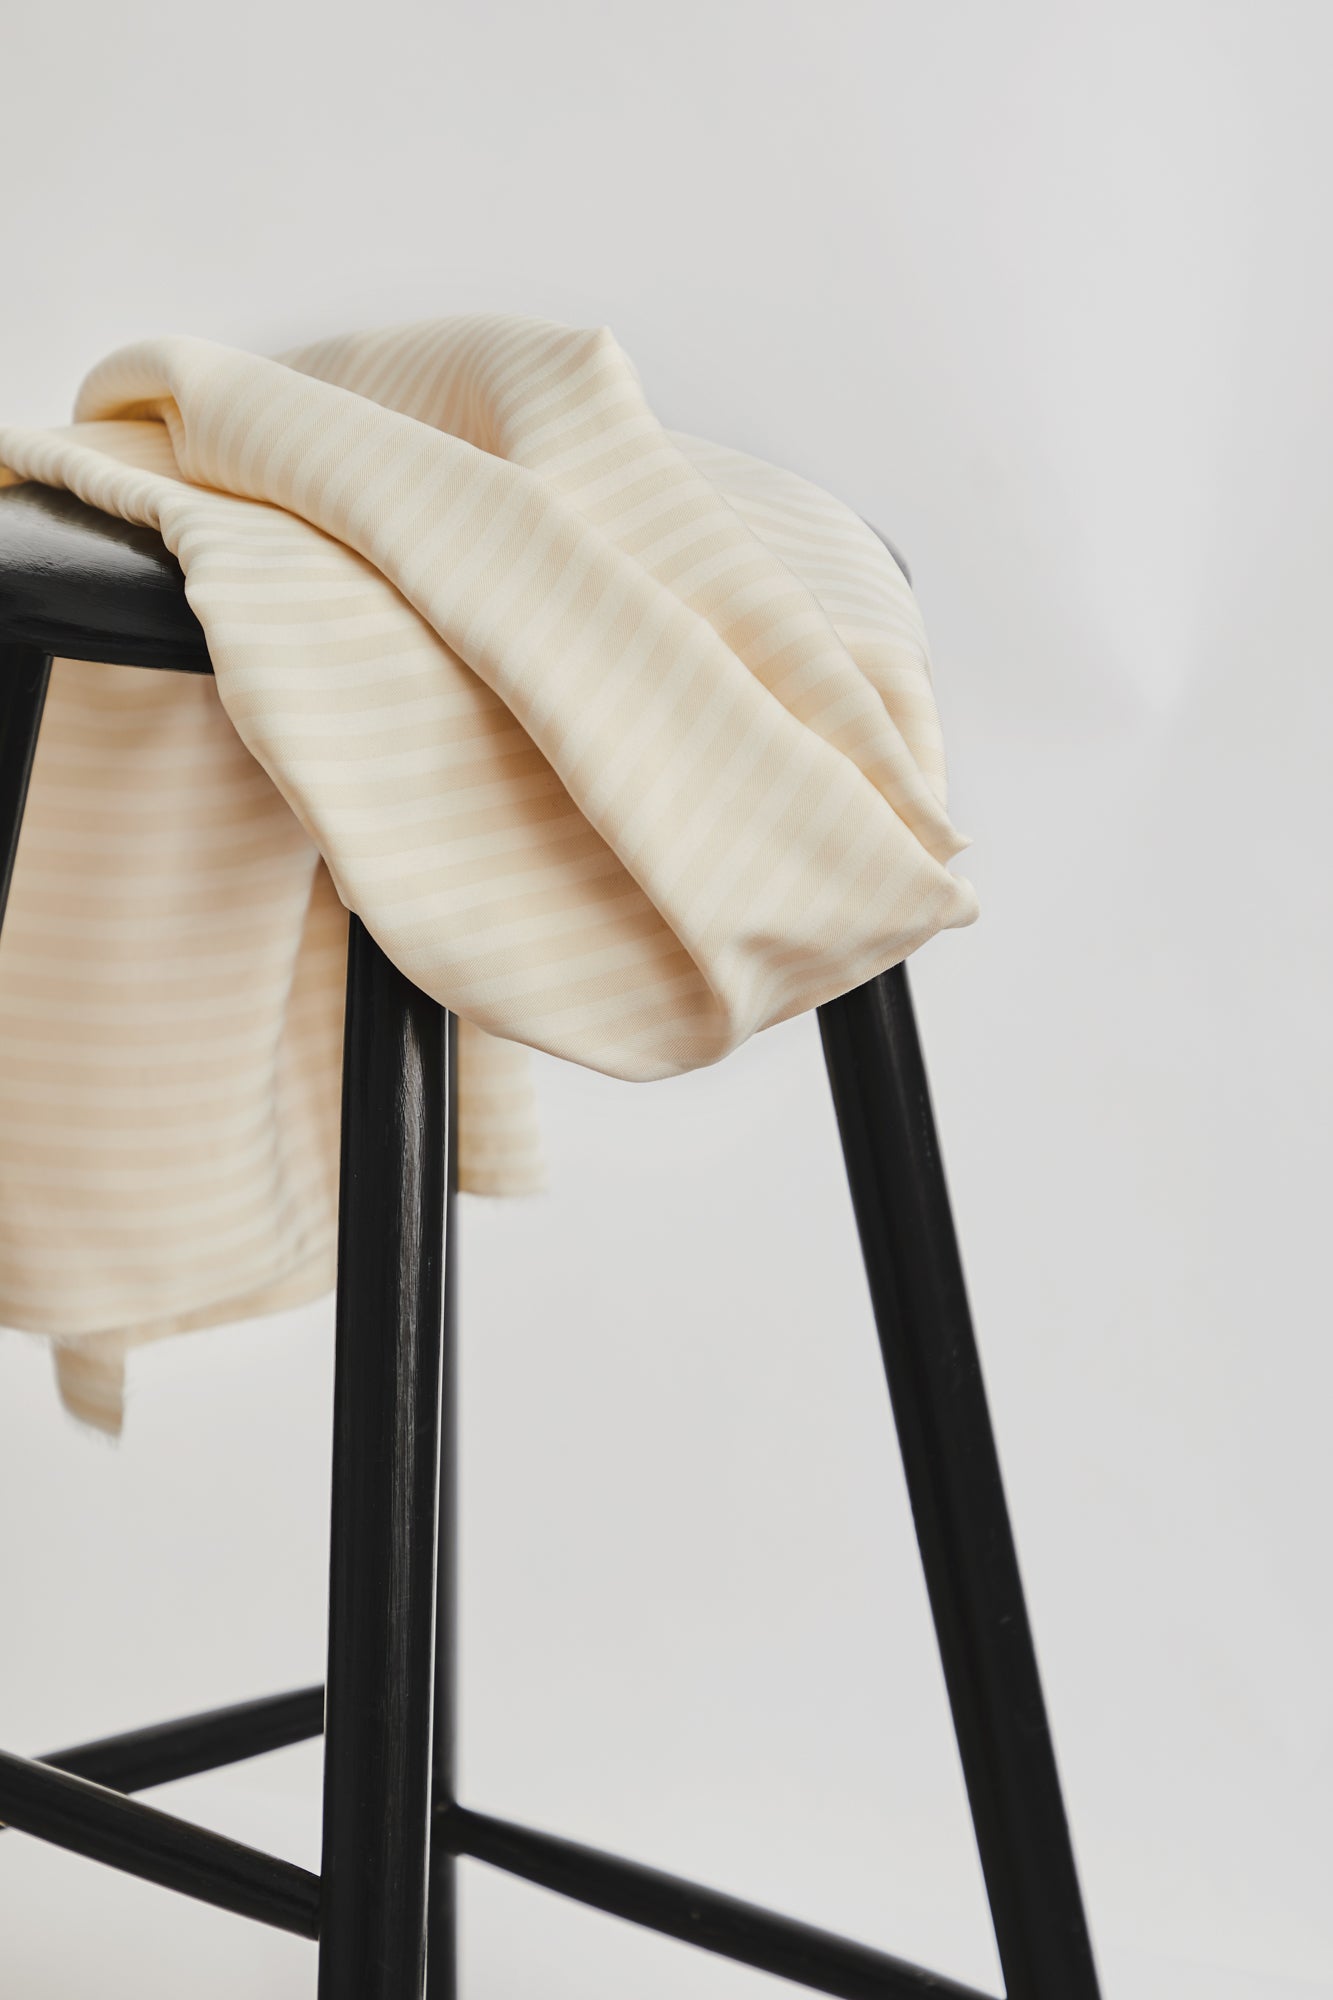 Two Tone stripe twill tencel, sustainable woven fabric in shell colour draped on black stool